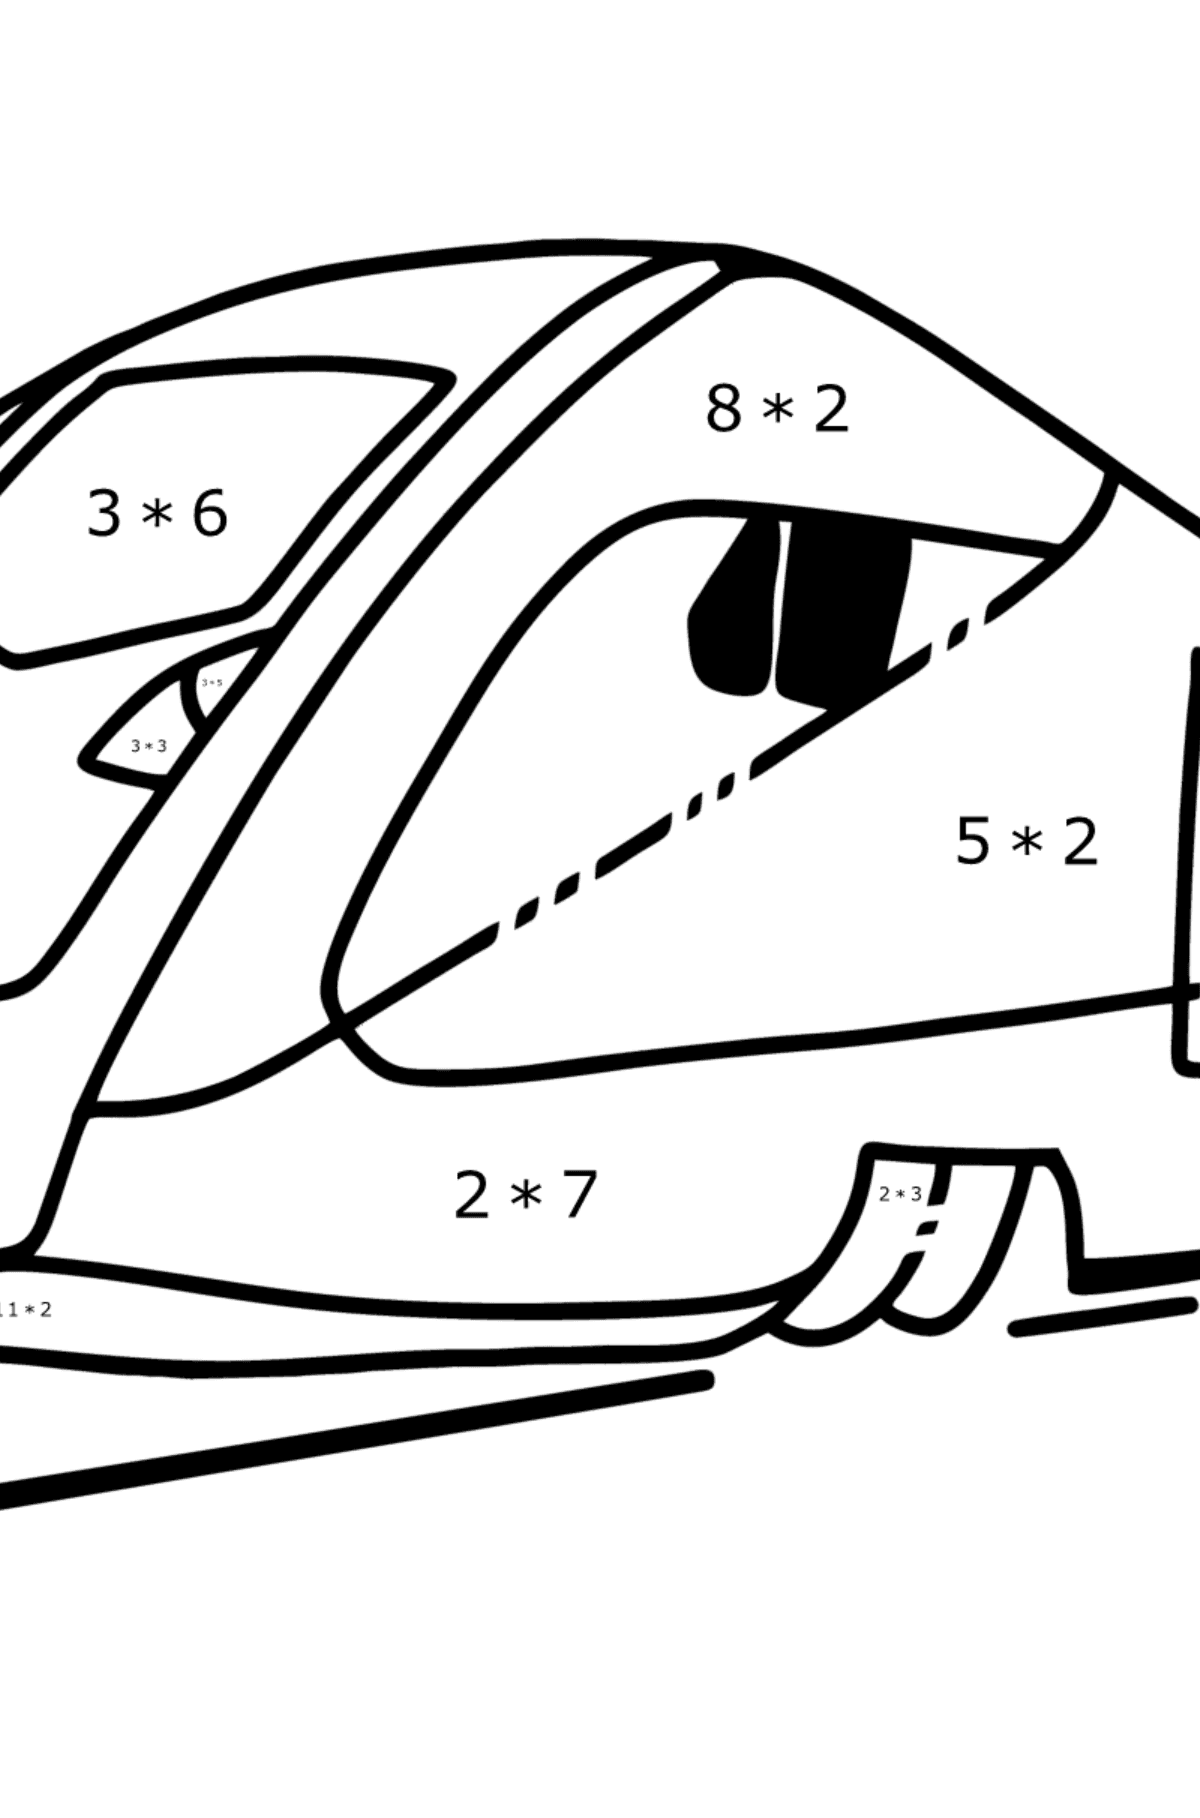 Train coloring page for children - Math Coloring - Multiplication for Kids